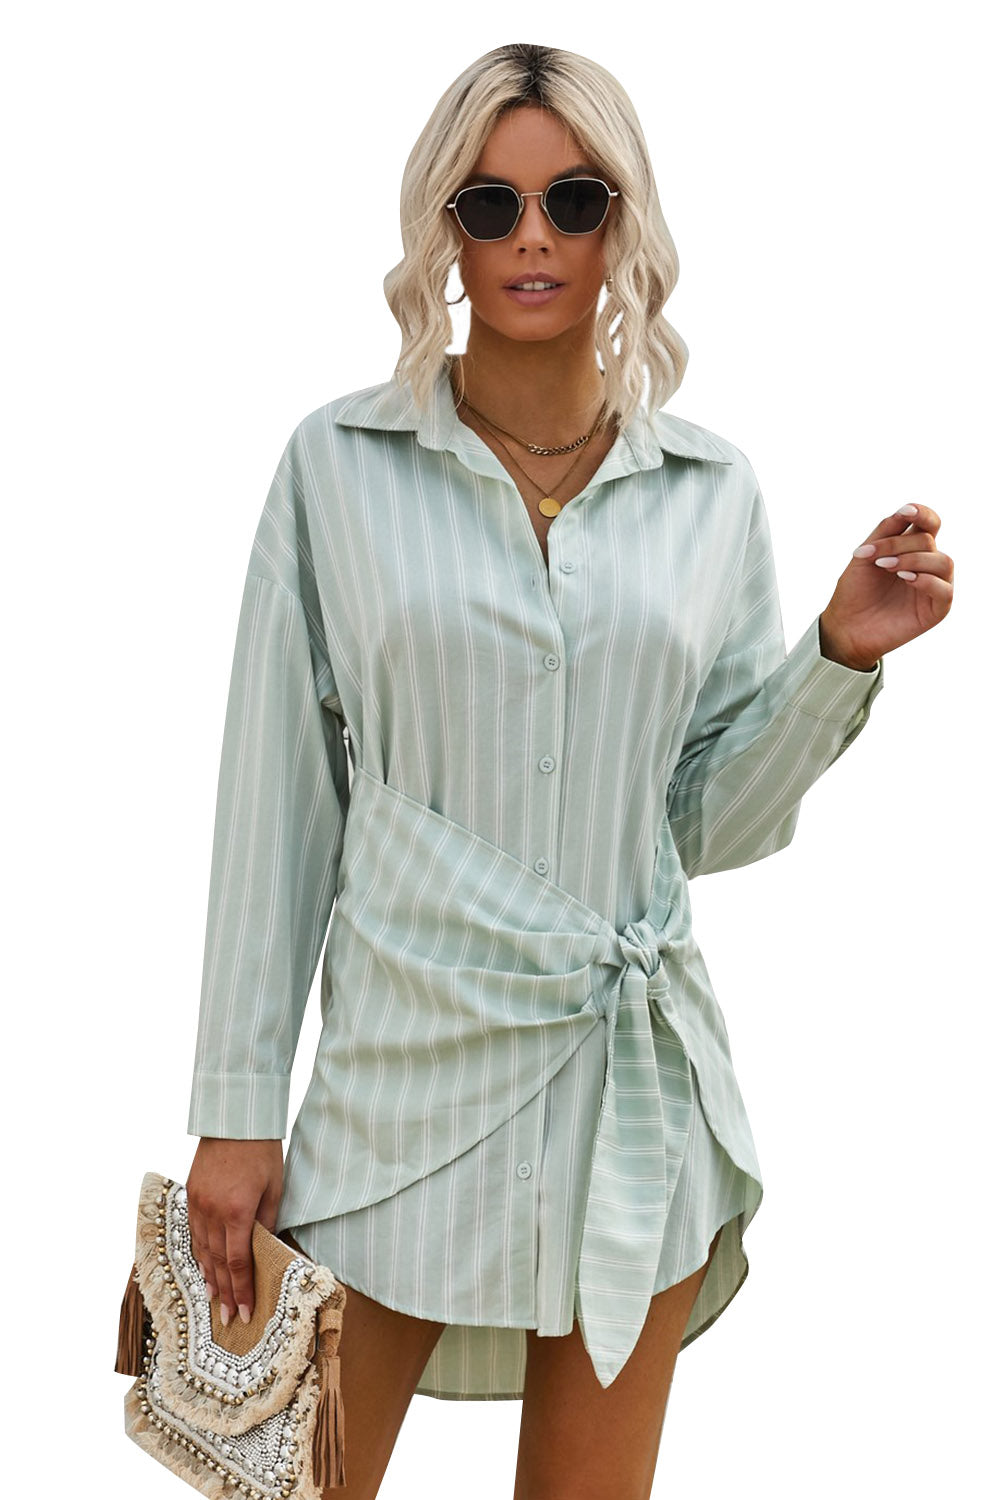 Long Sleeve Striped Tie Front Button Shirt Tunic Dress